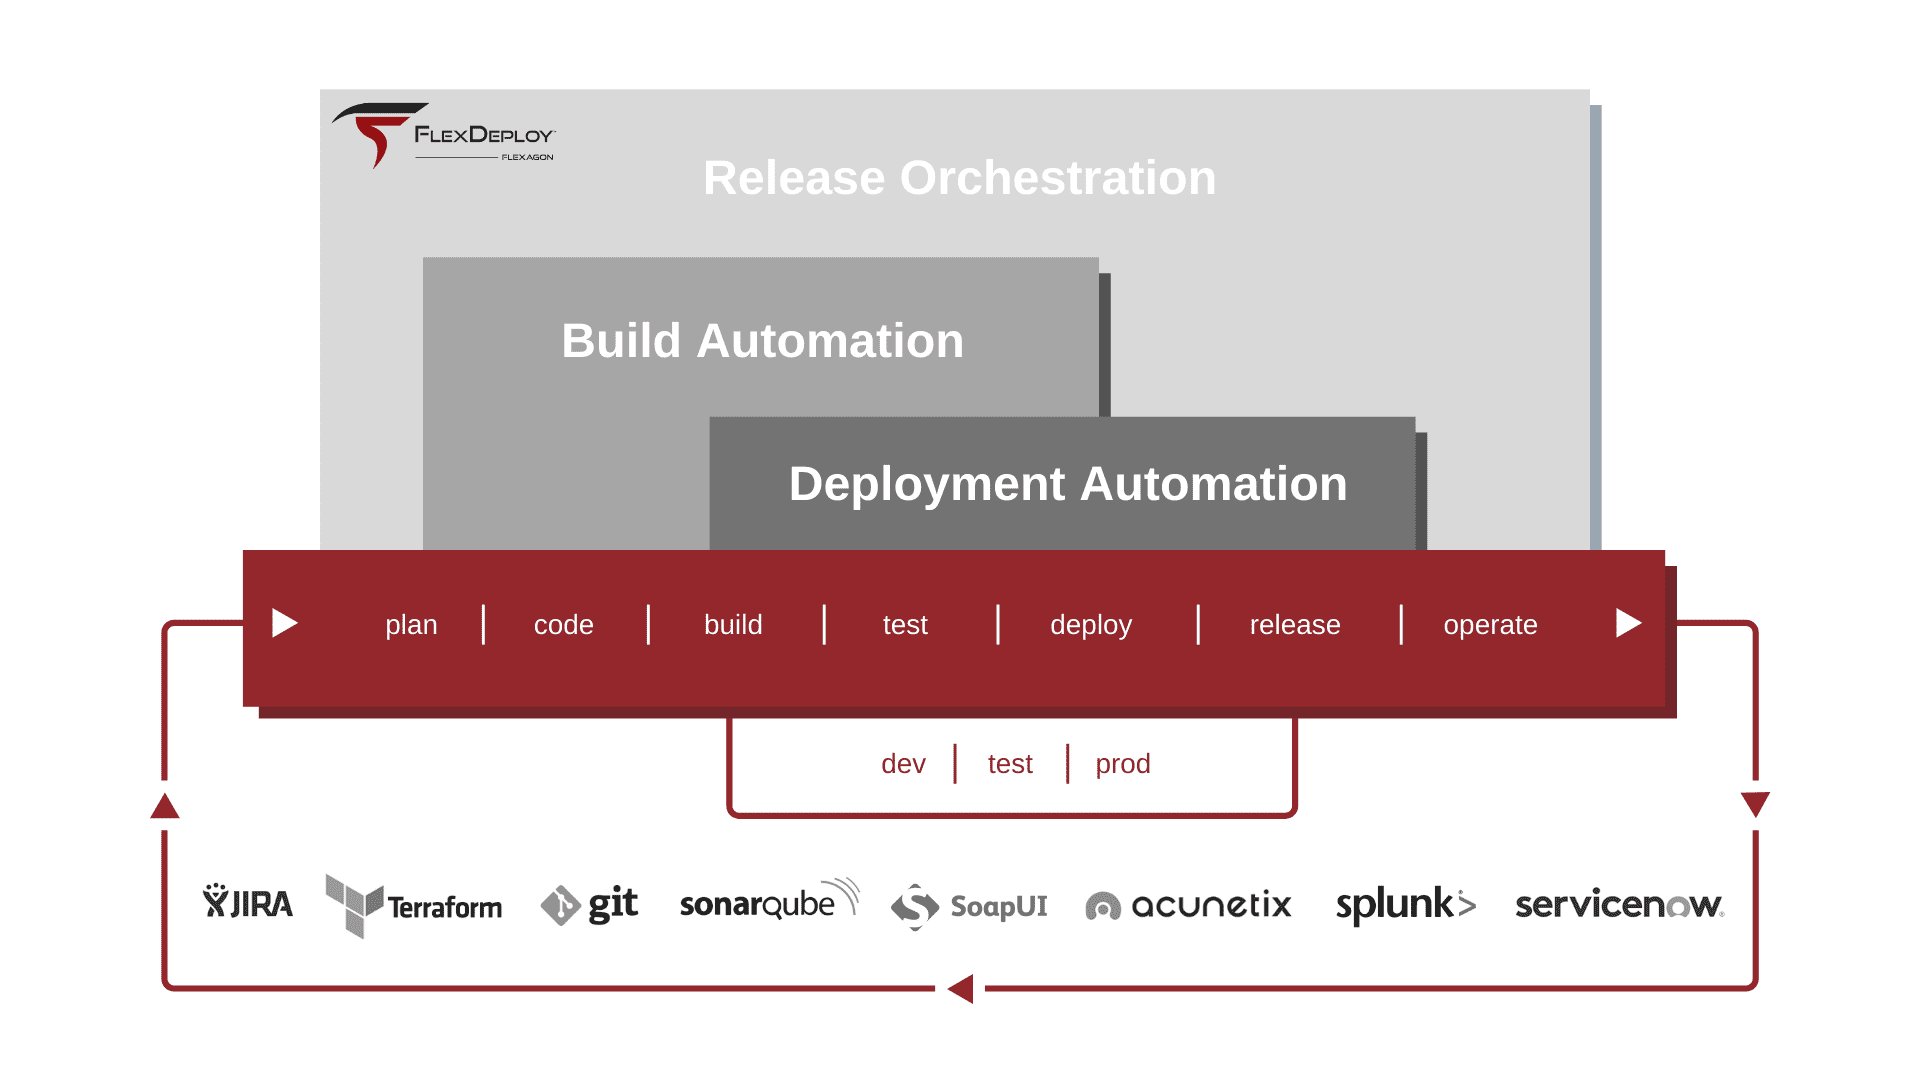 FlexDeploy build automation, deployment automation, and release orchestration